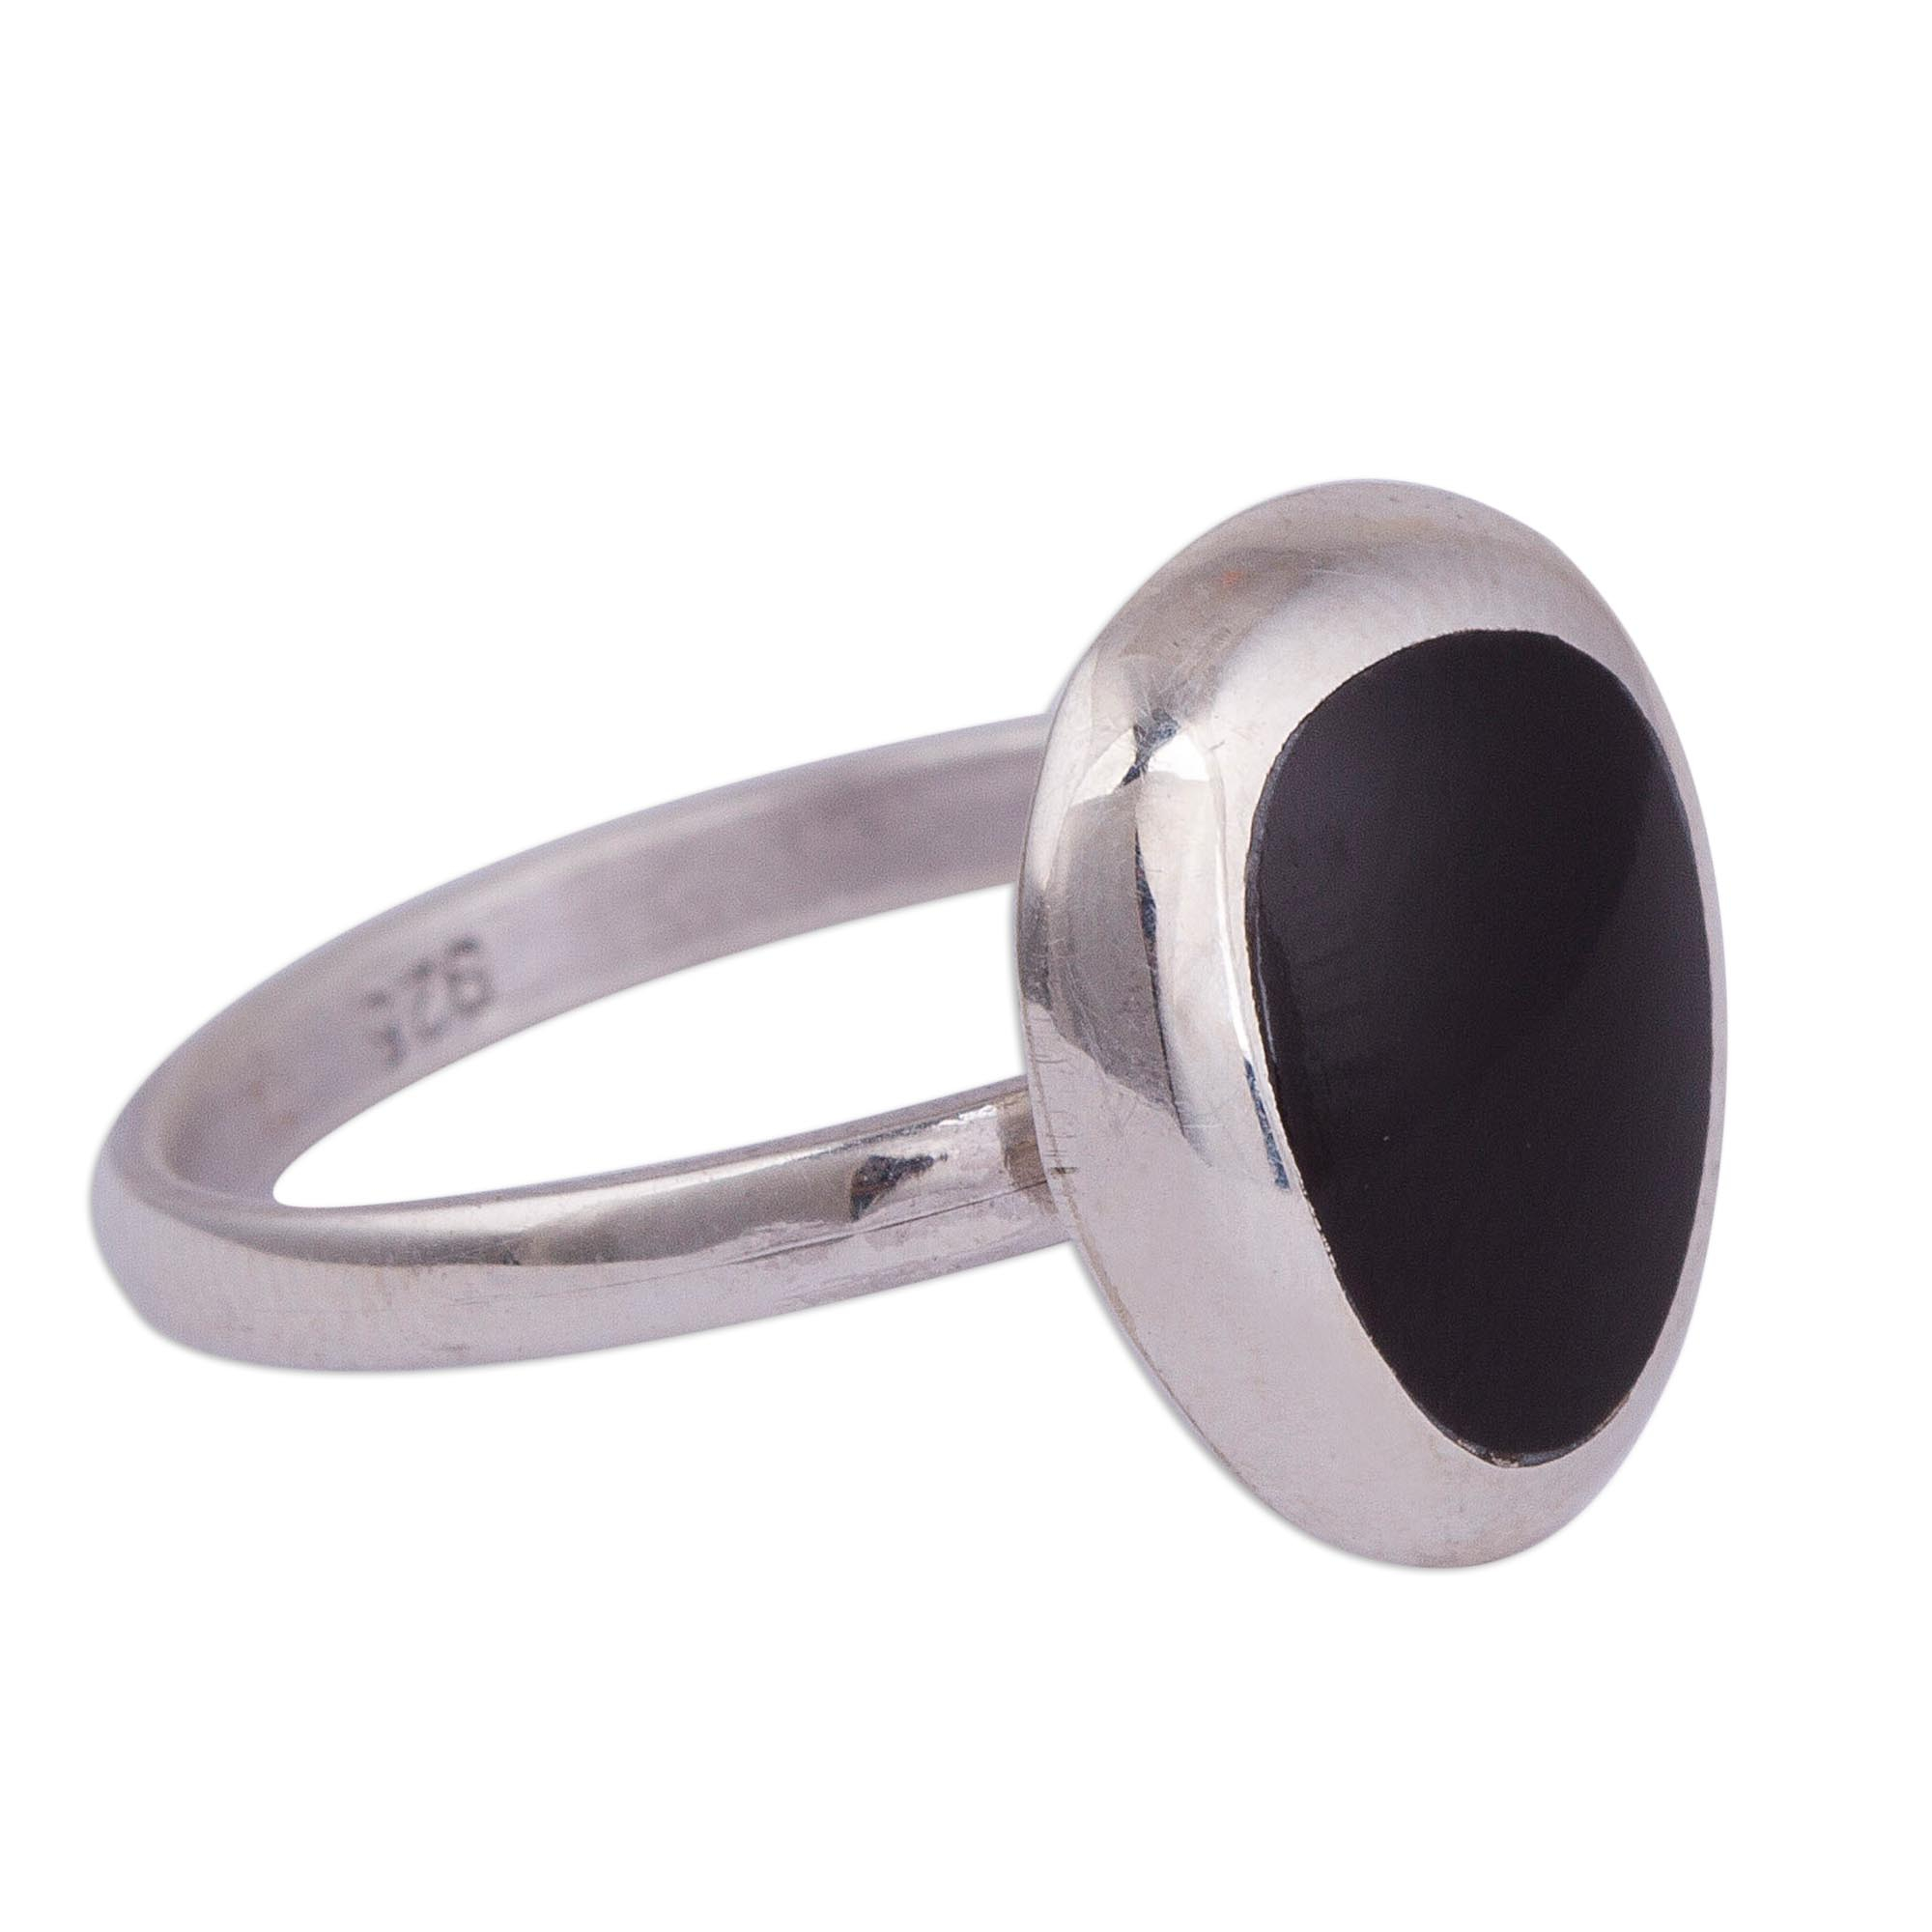 Onyx and Sterling Silver Cocktail Ring from Peru - Inca Nobility | NOVICA